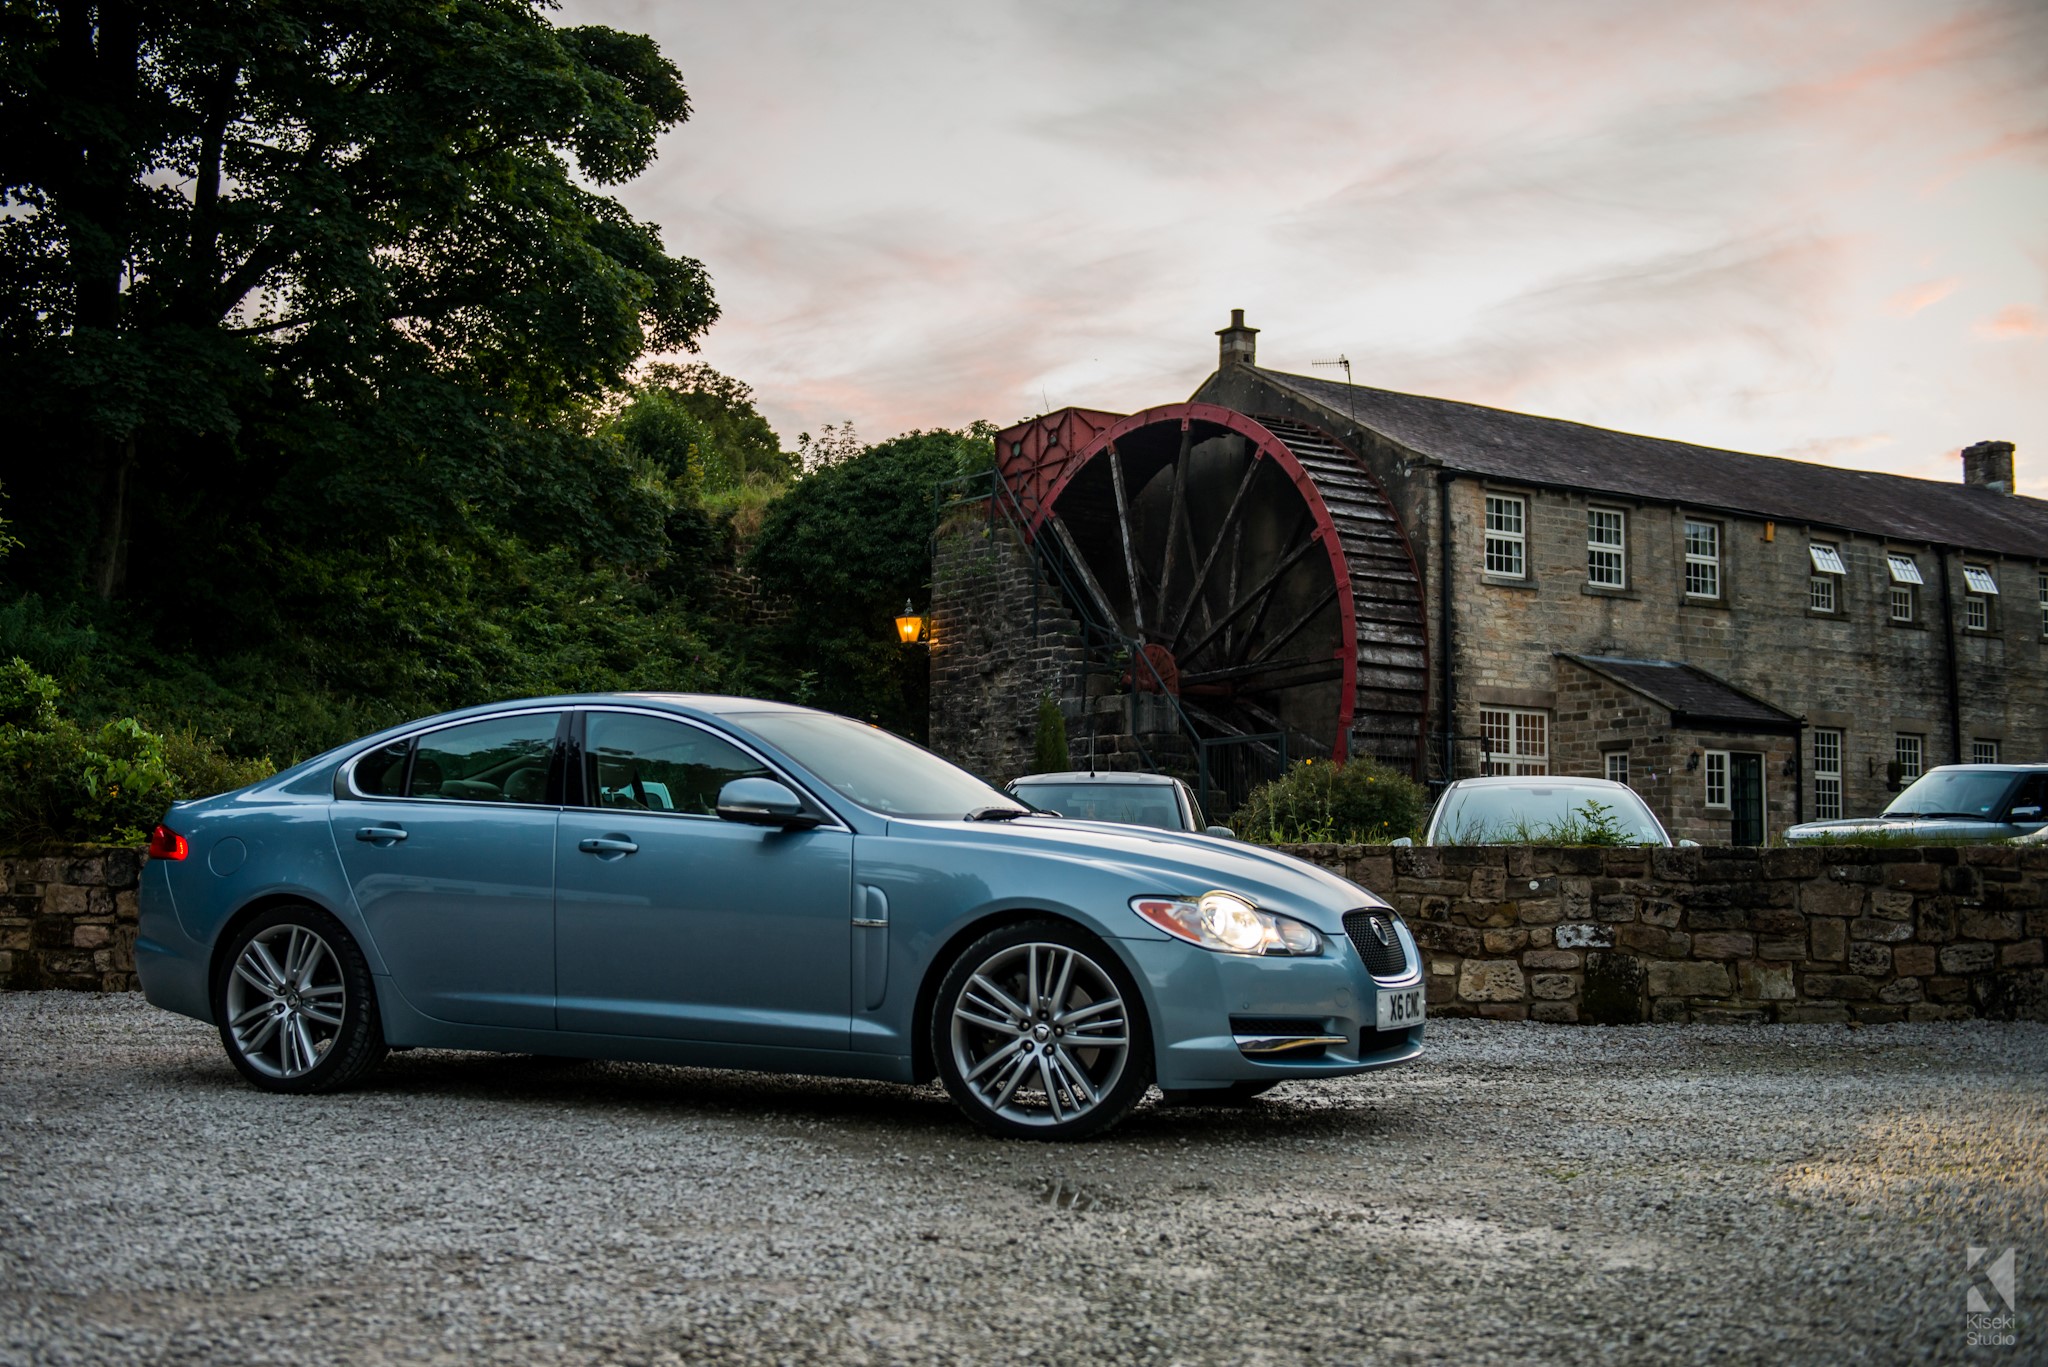 Jaguar XF-S next to a watermill